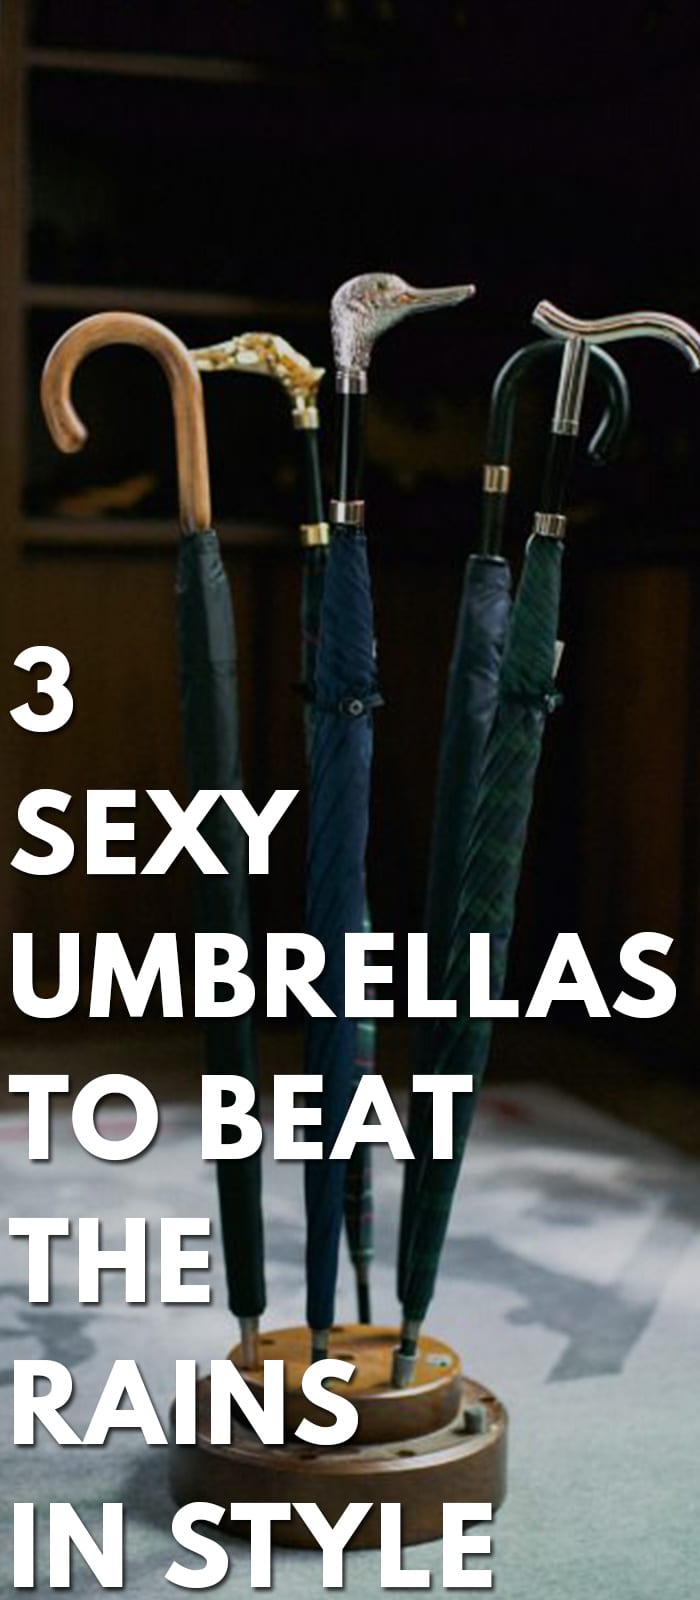 3-Sexy-Umbrellas-to-Beat-The-Rains-In-Style.............